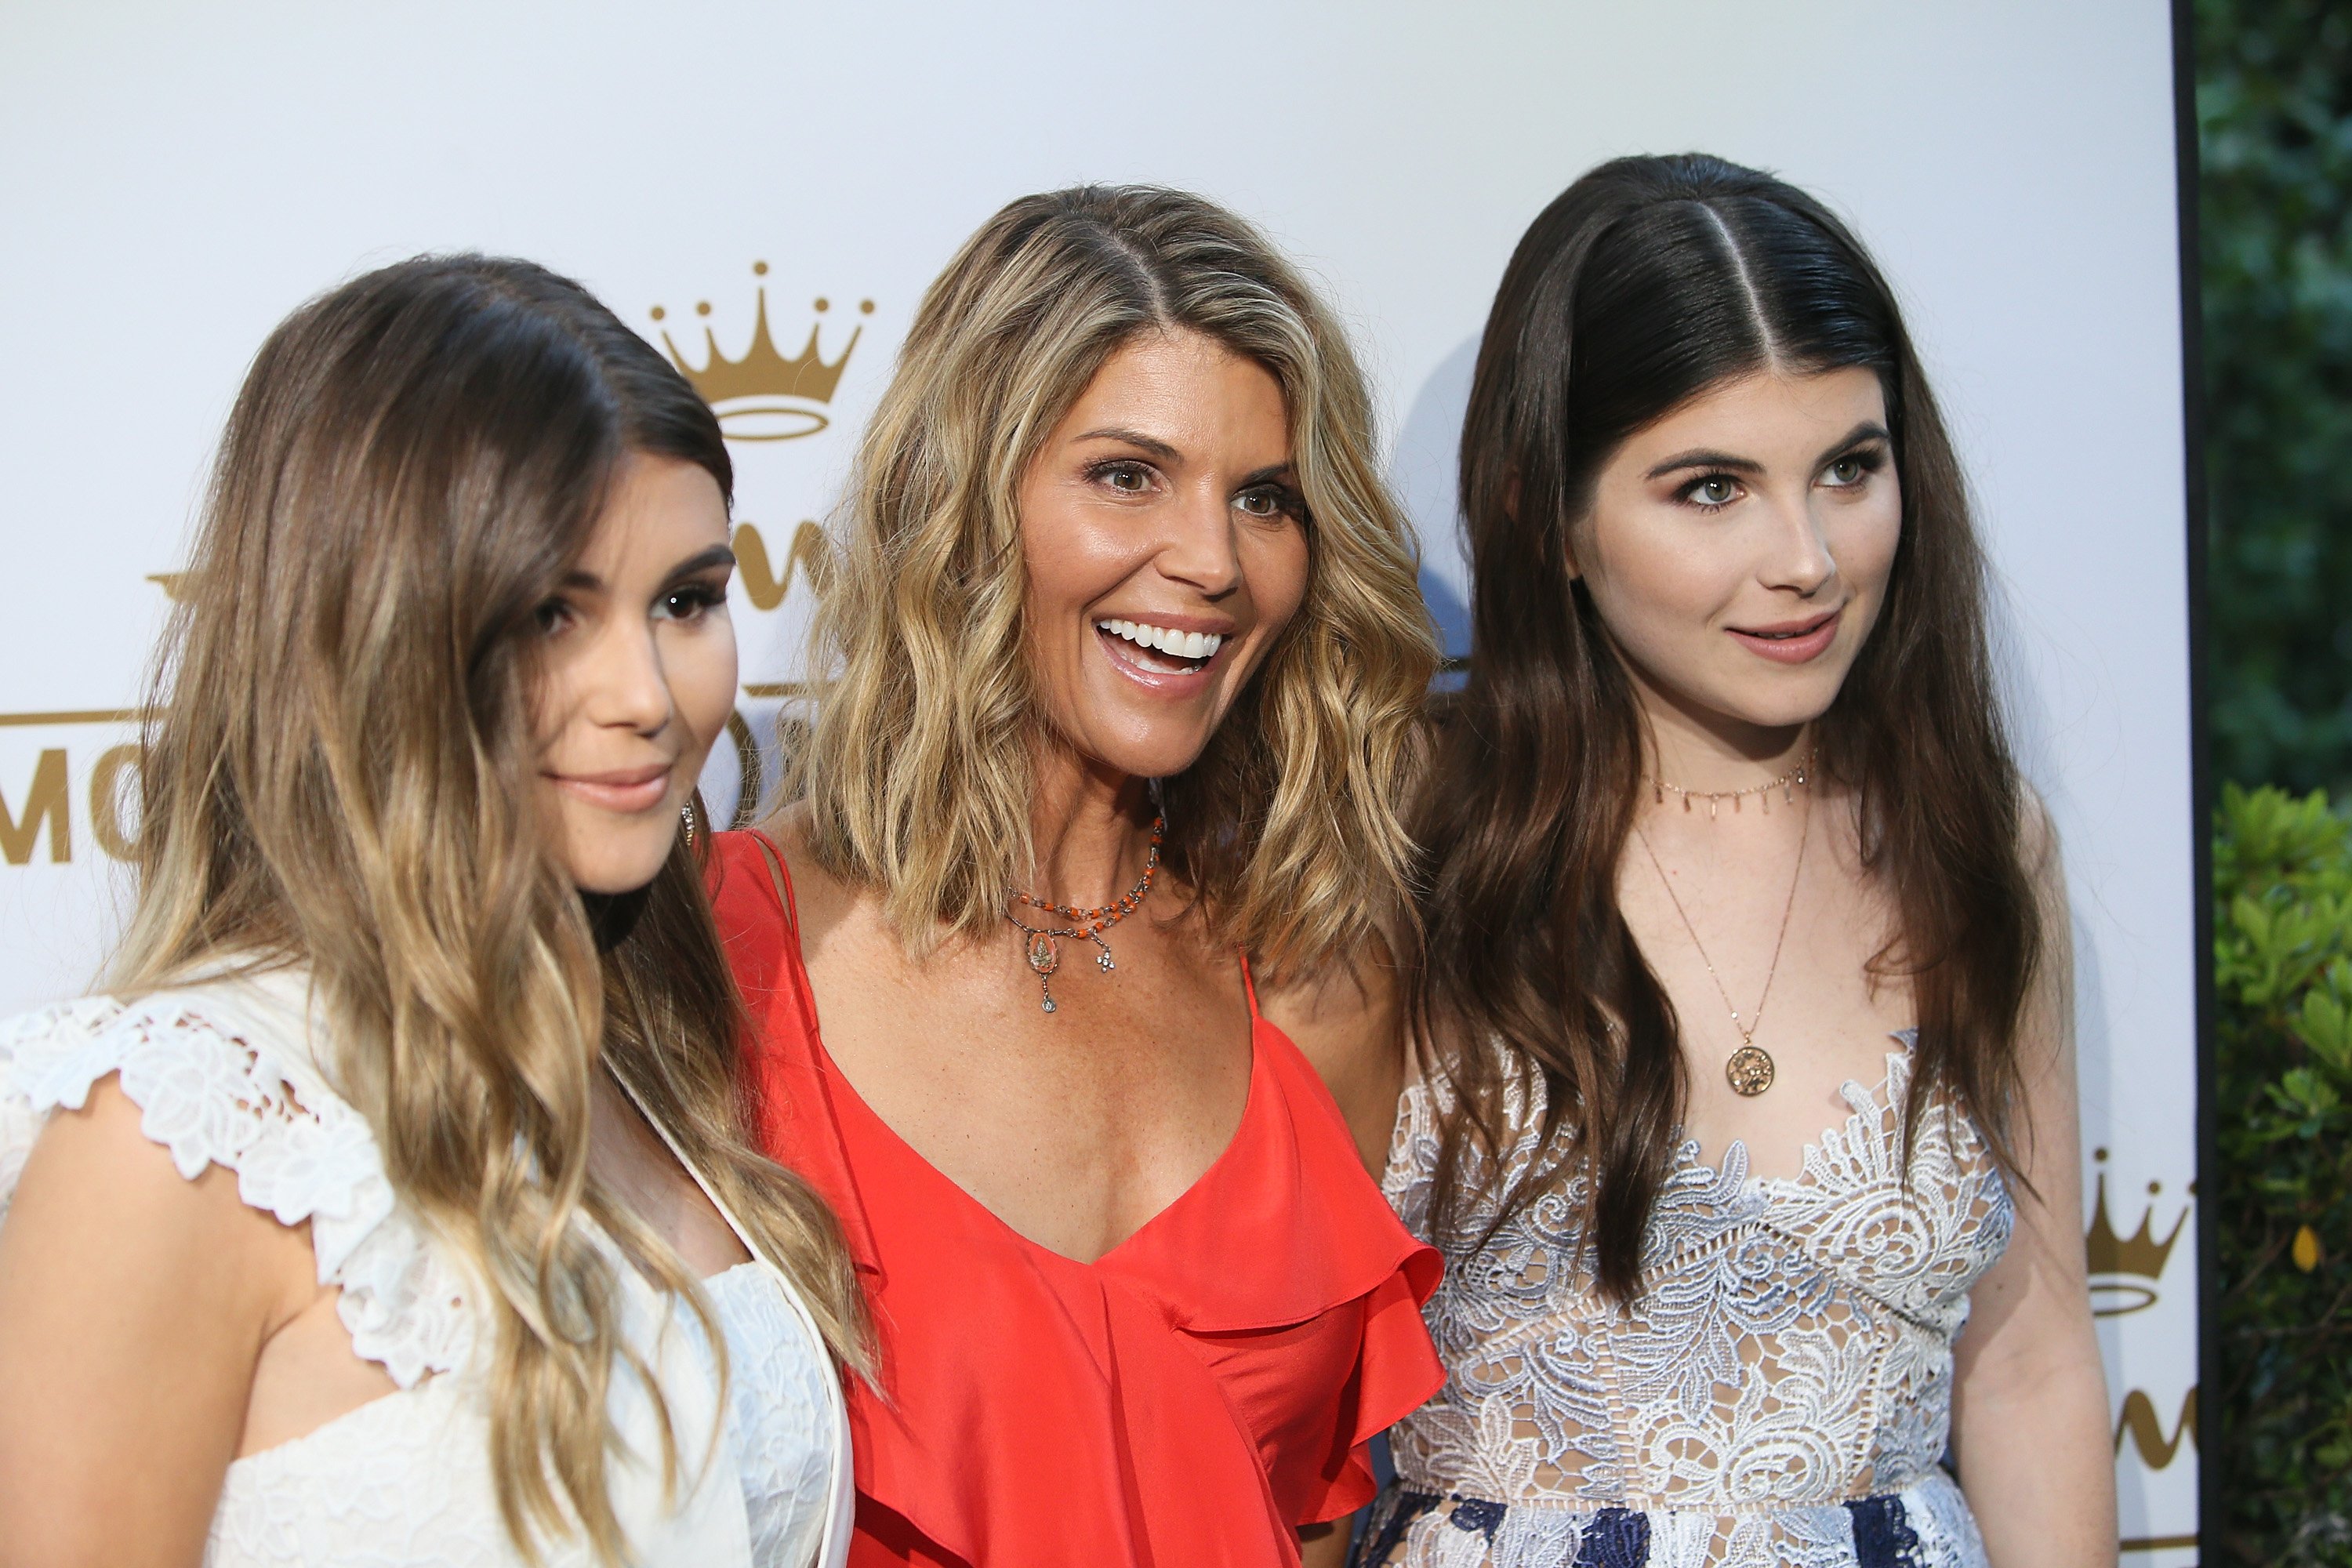 Lori Loughlin, Olivia Jade, and Isabella Rose Giannulli | Photo: Getty Images